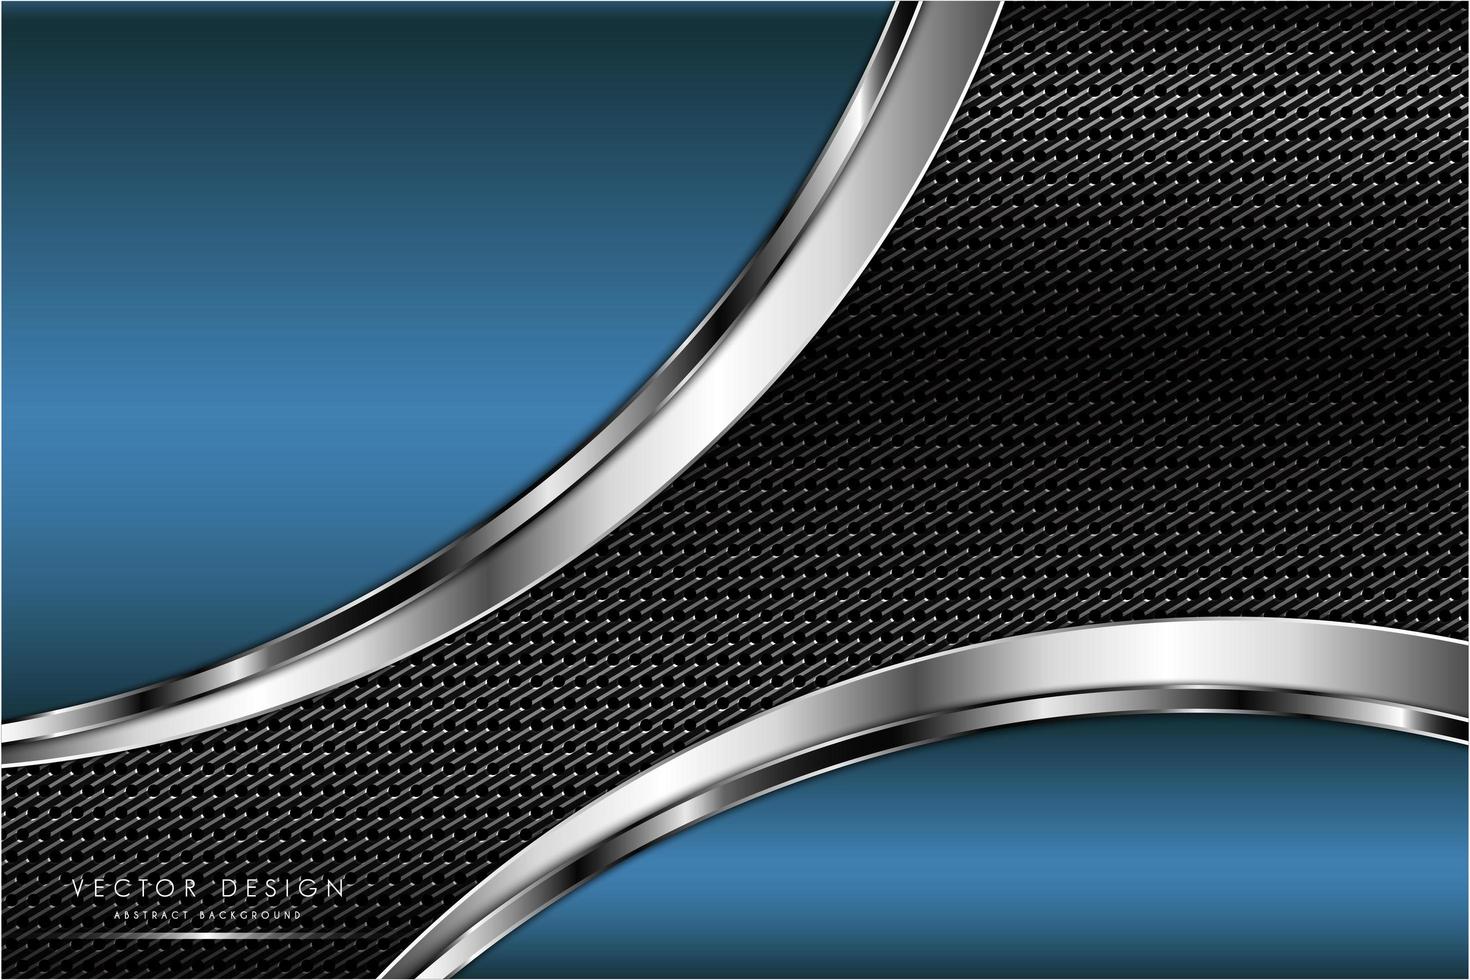 Metallic blue and silver design with carbon fiber texture vector